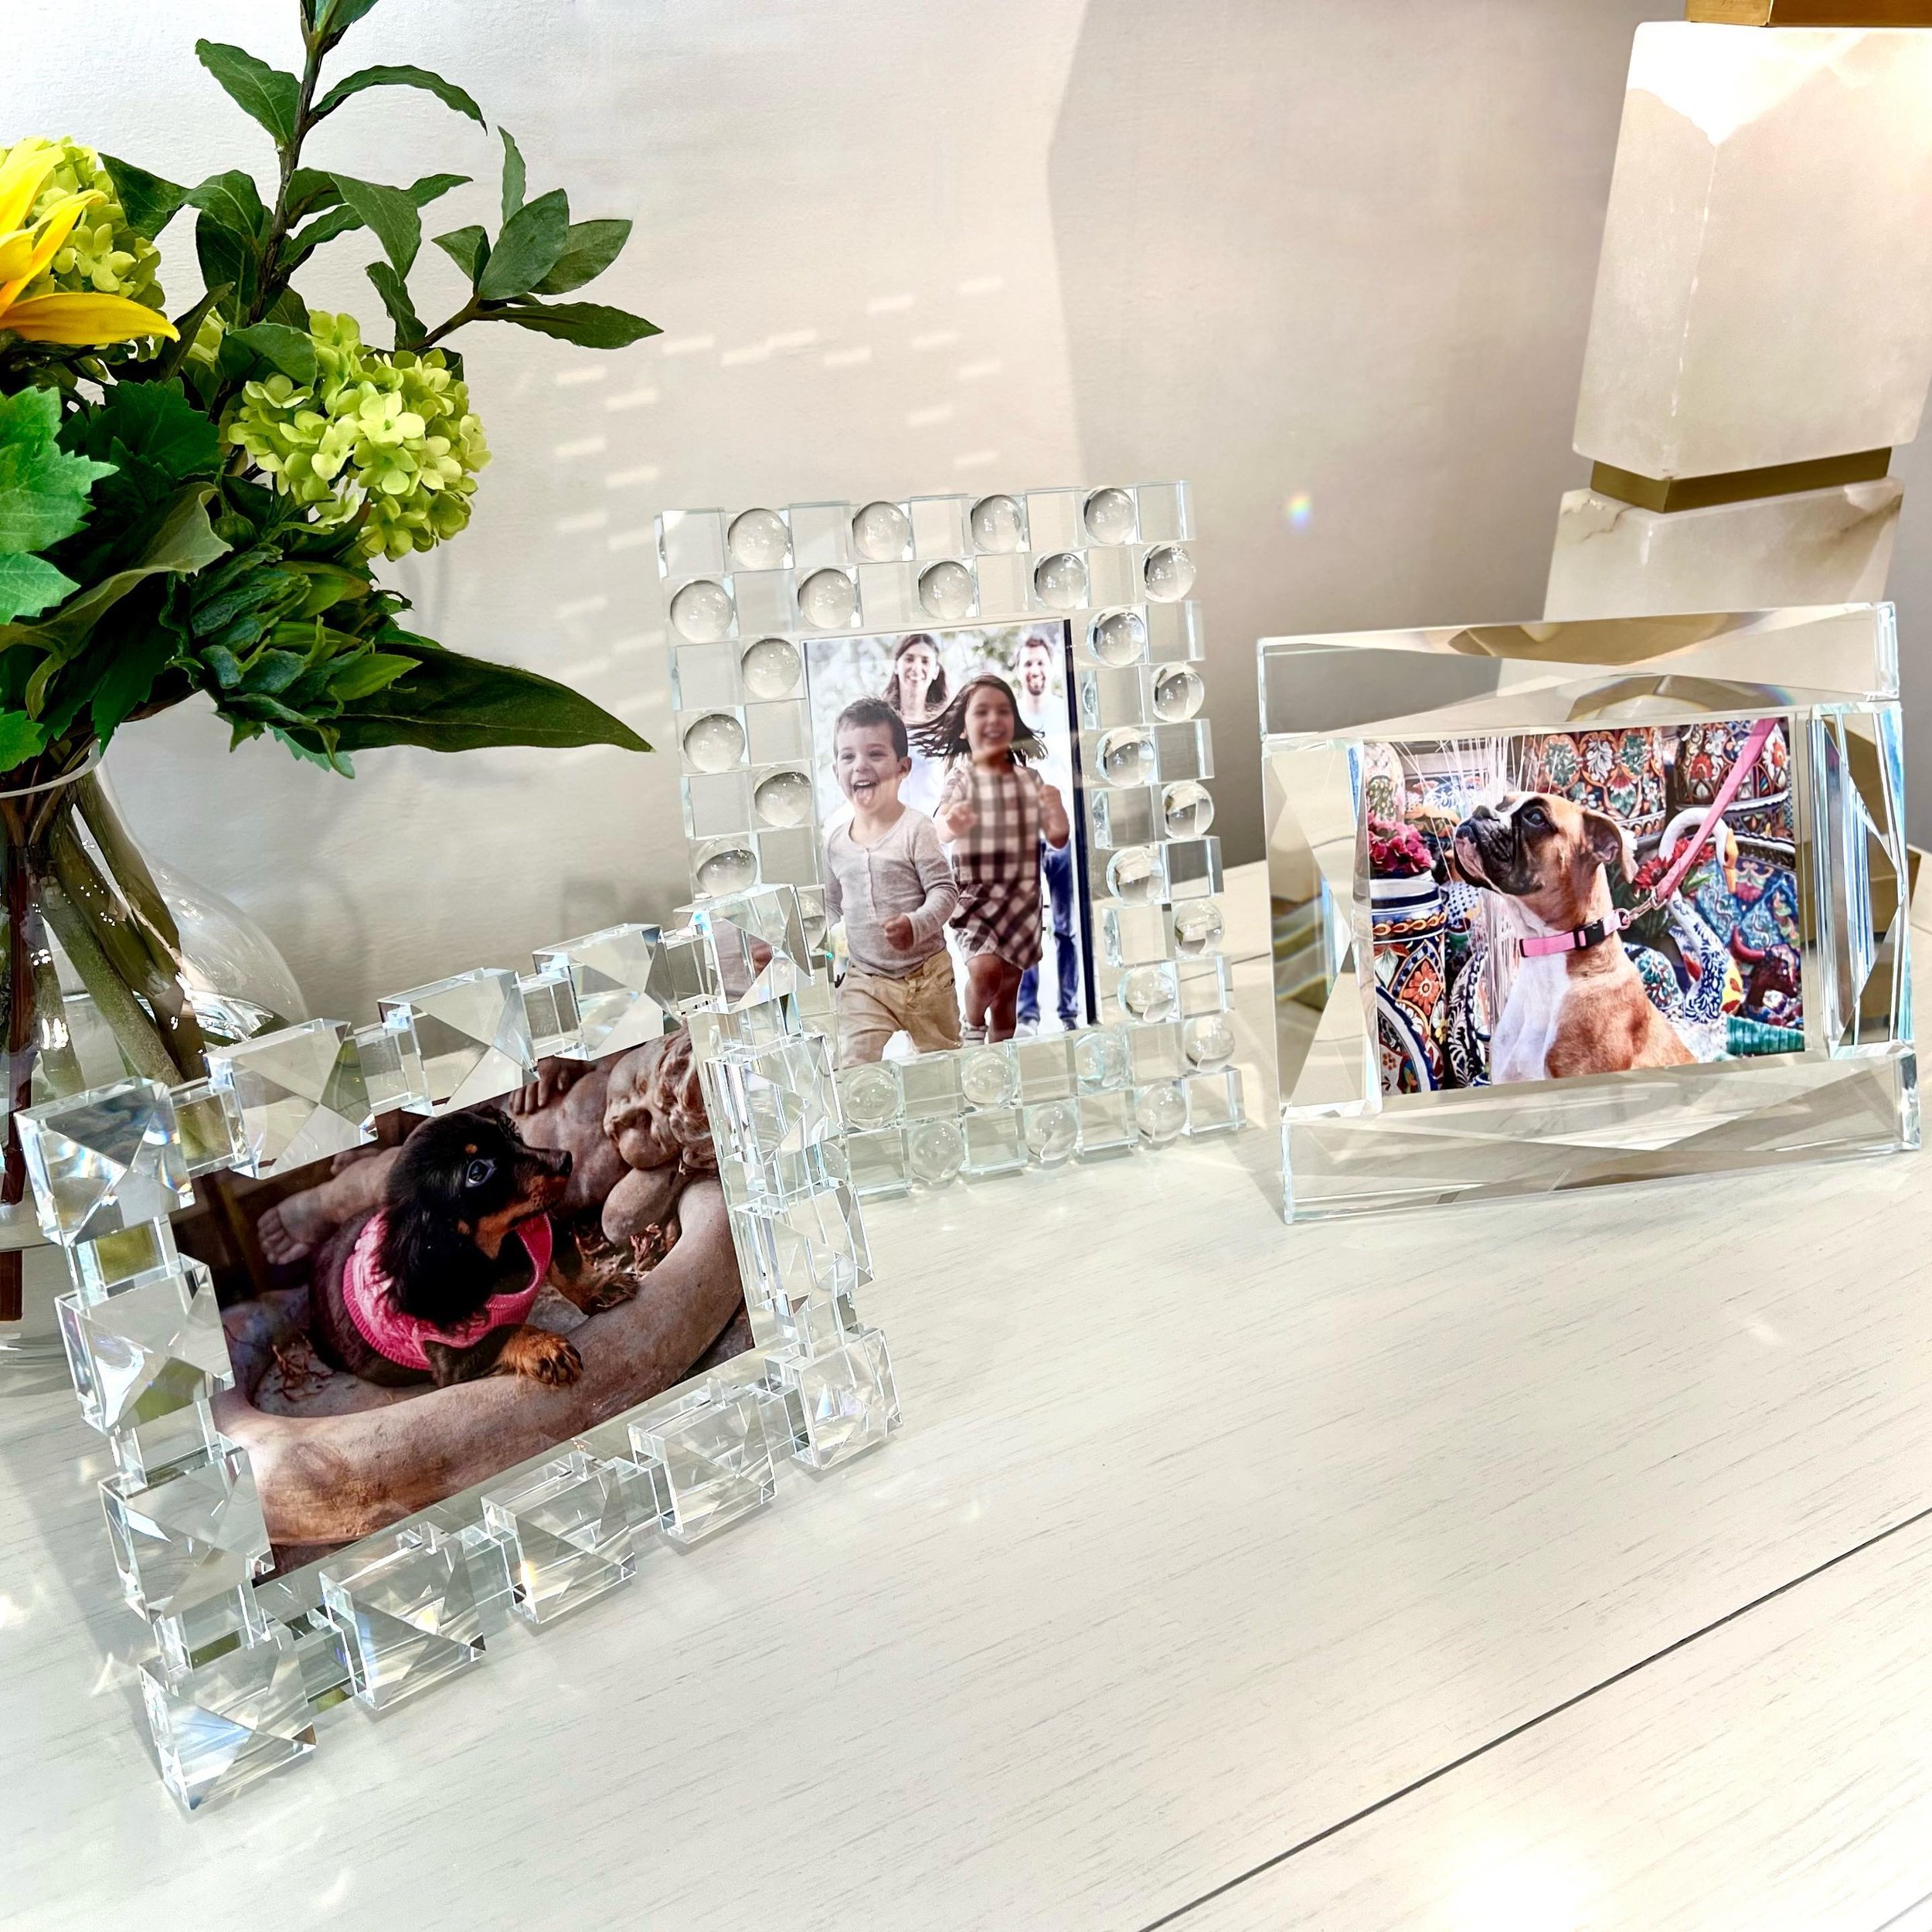 Mother&rsquo;s Day is just around the corner! What could Mom want more than to see her favorite people sparkle in a brilliant new frame?!!✨

#mothersday #mothersdaygift #mothersdaygiftideas #giftideas #newarrivals #photoframe #sparkle #homedecor #des